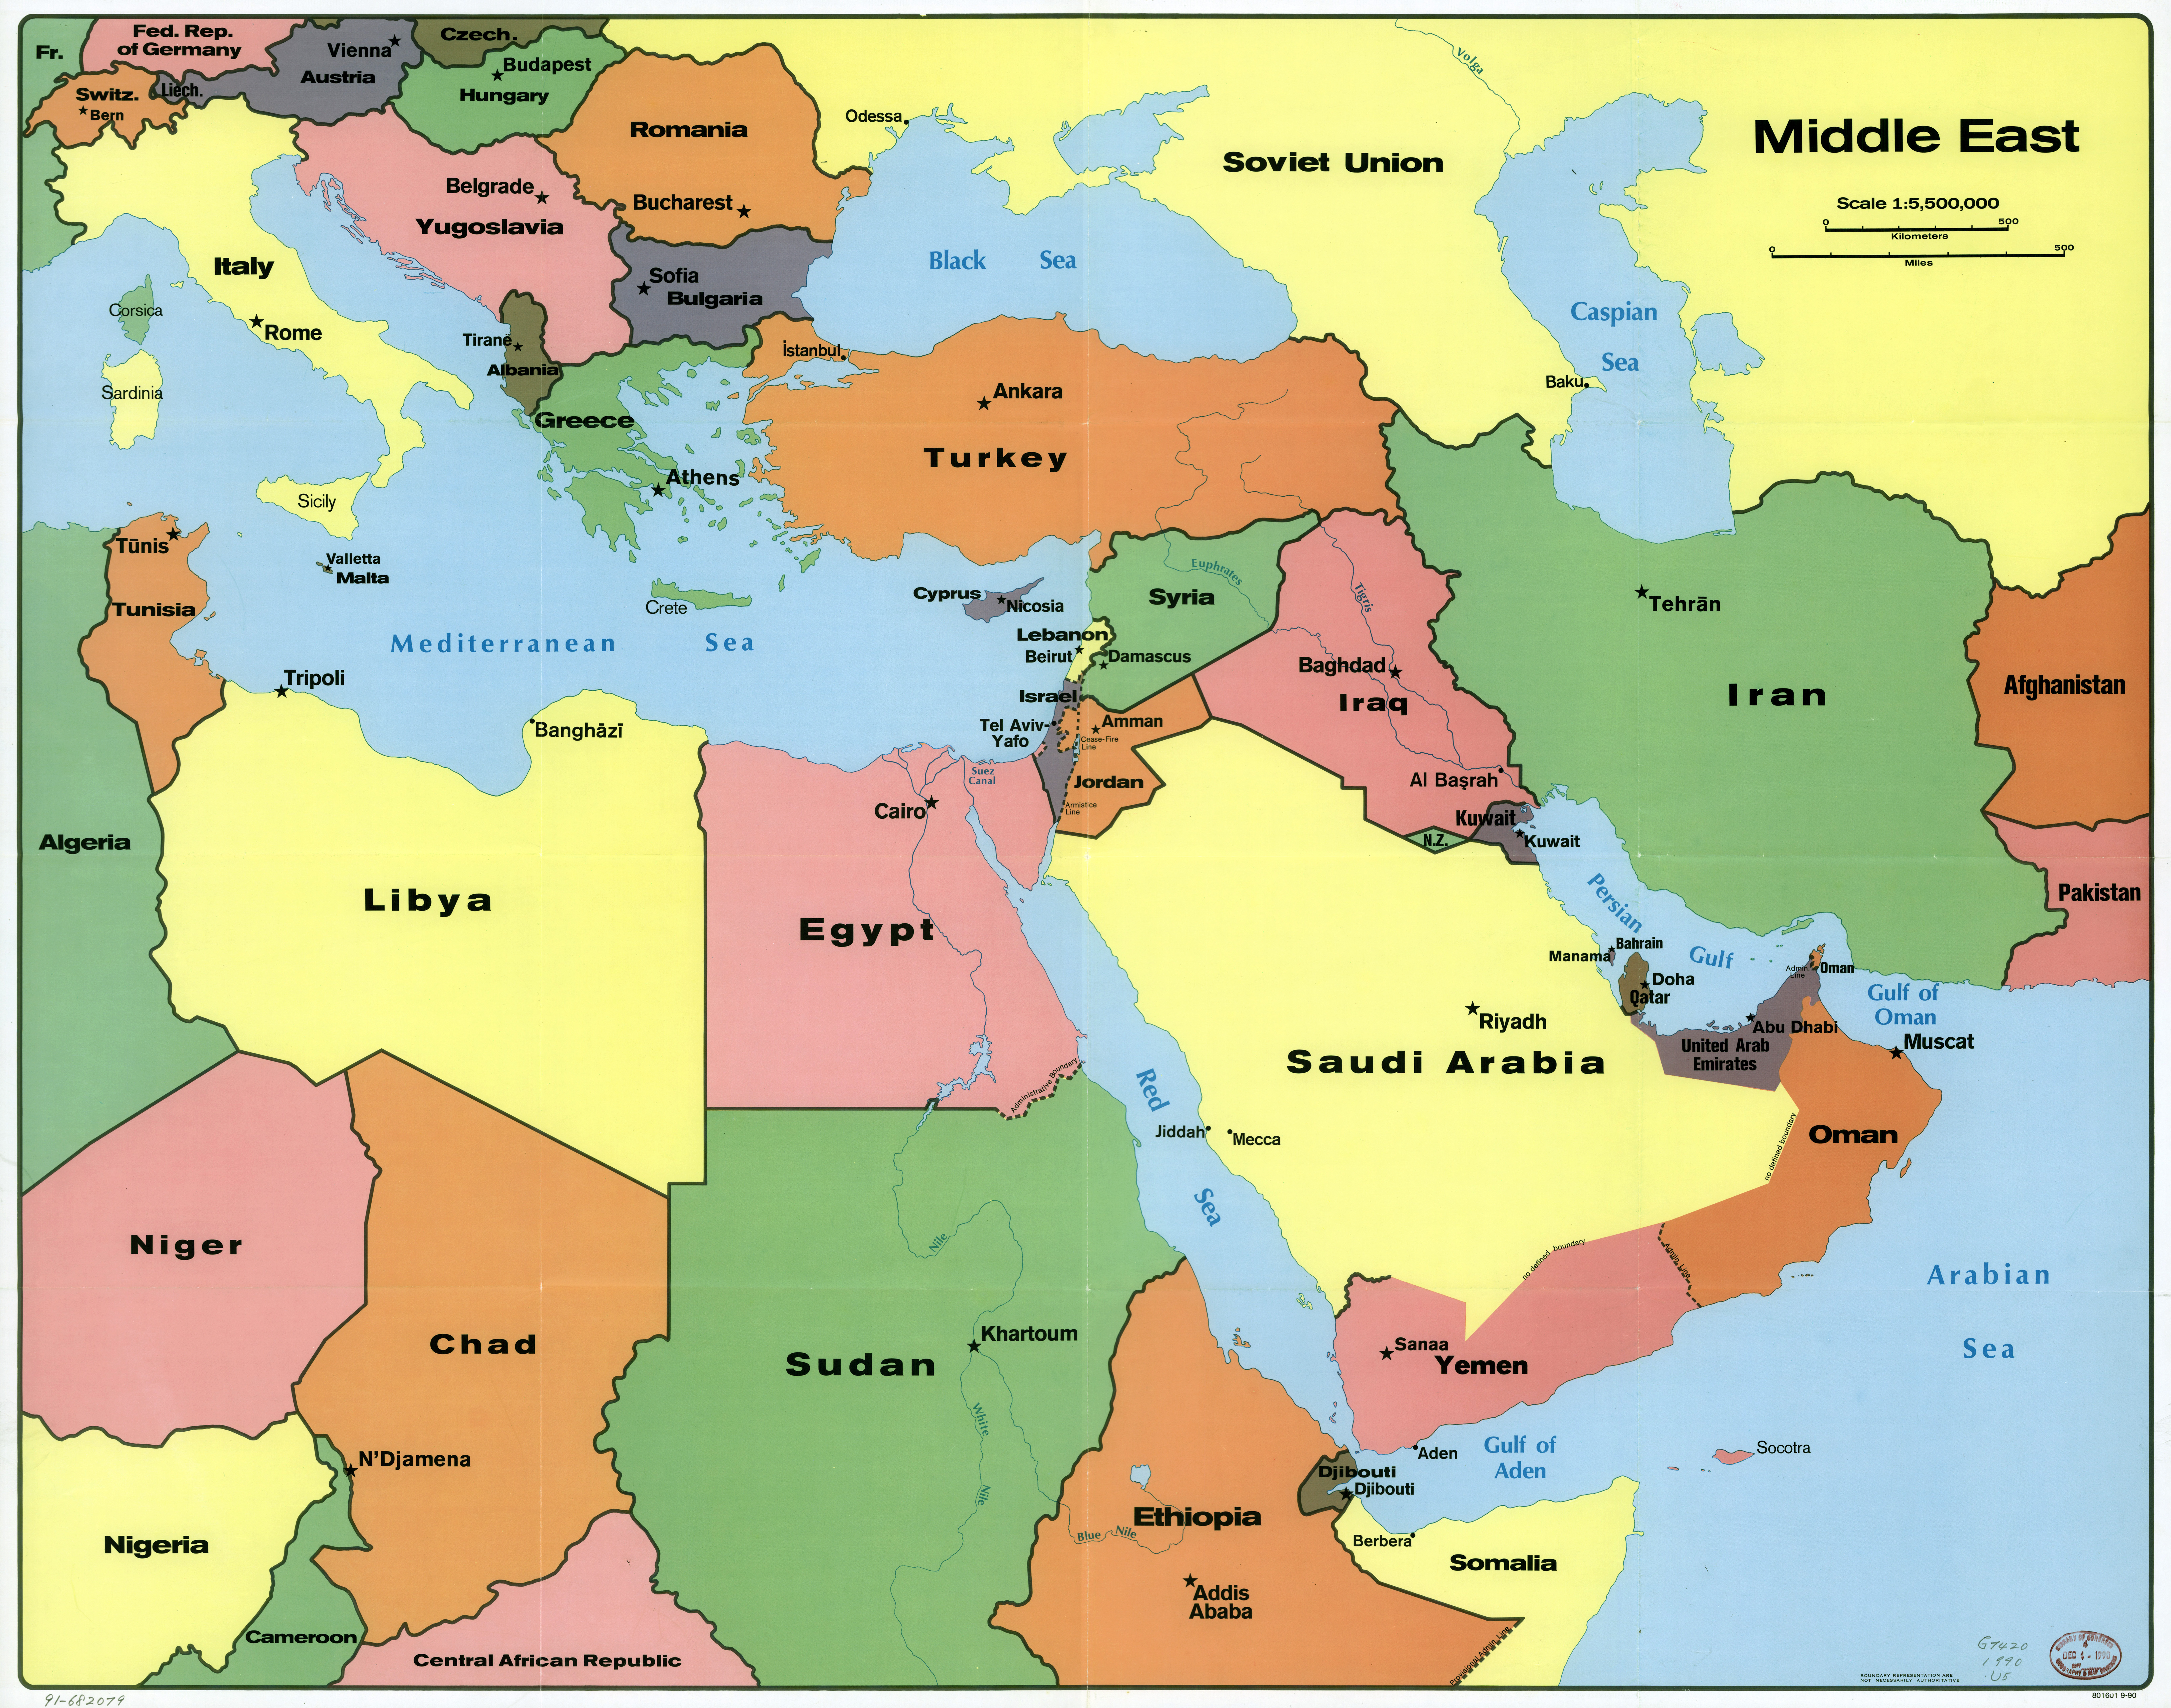 map of middle east with capitals Large Scale Political Map Of The Middle East With Capitals 1990 map of middle east with capitals